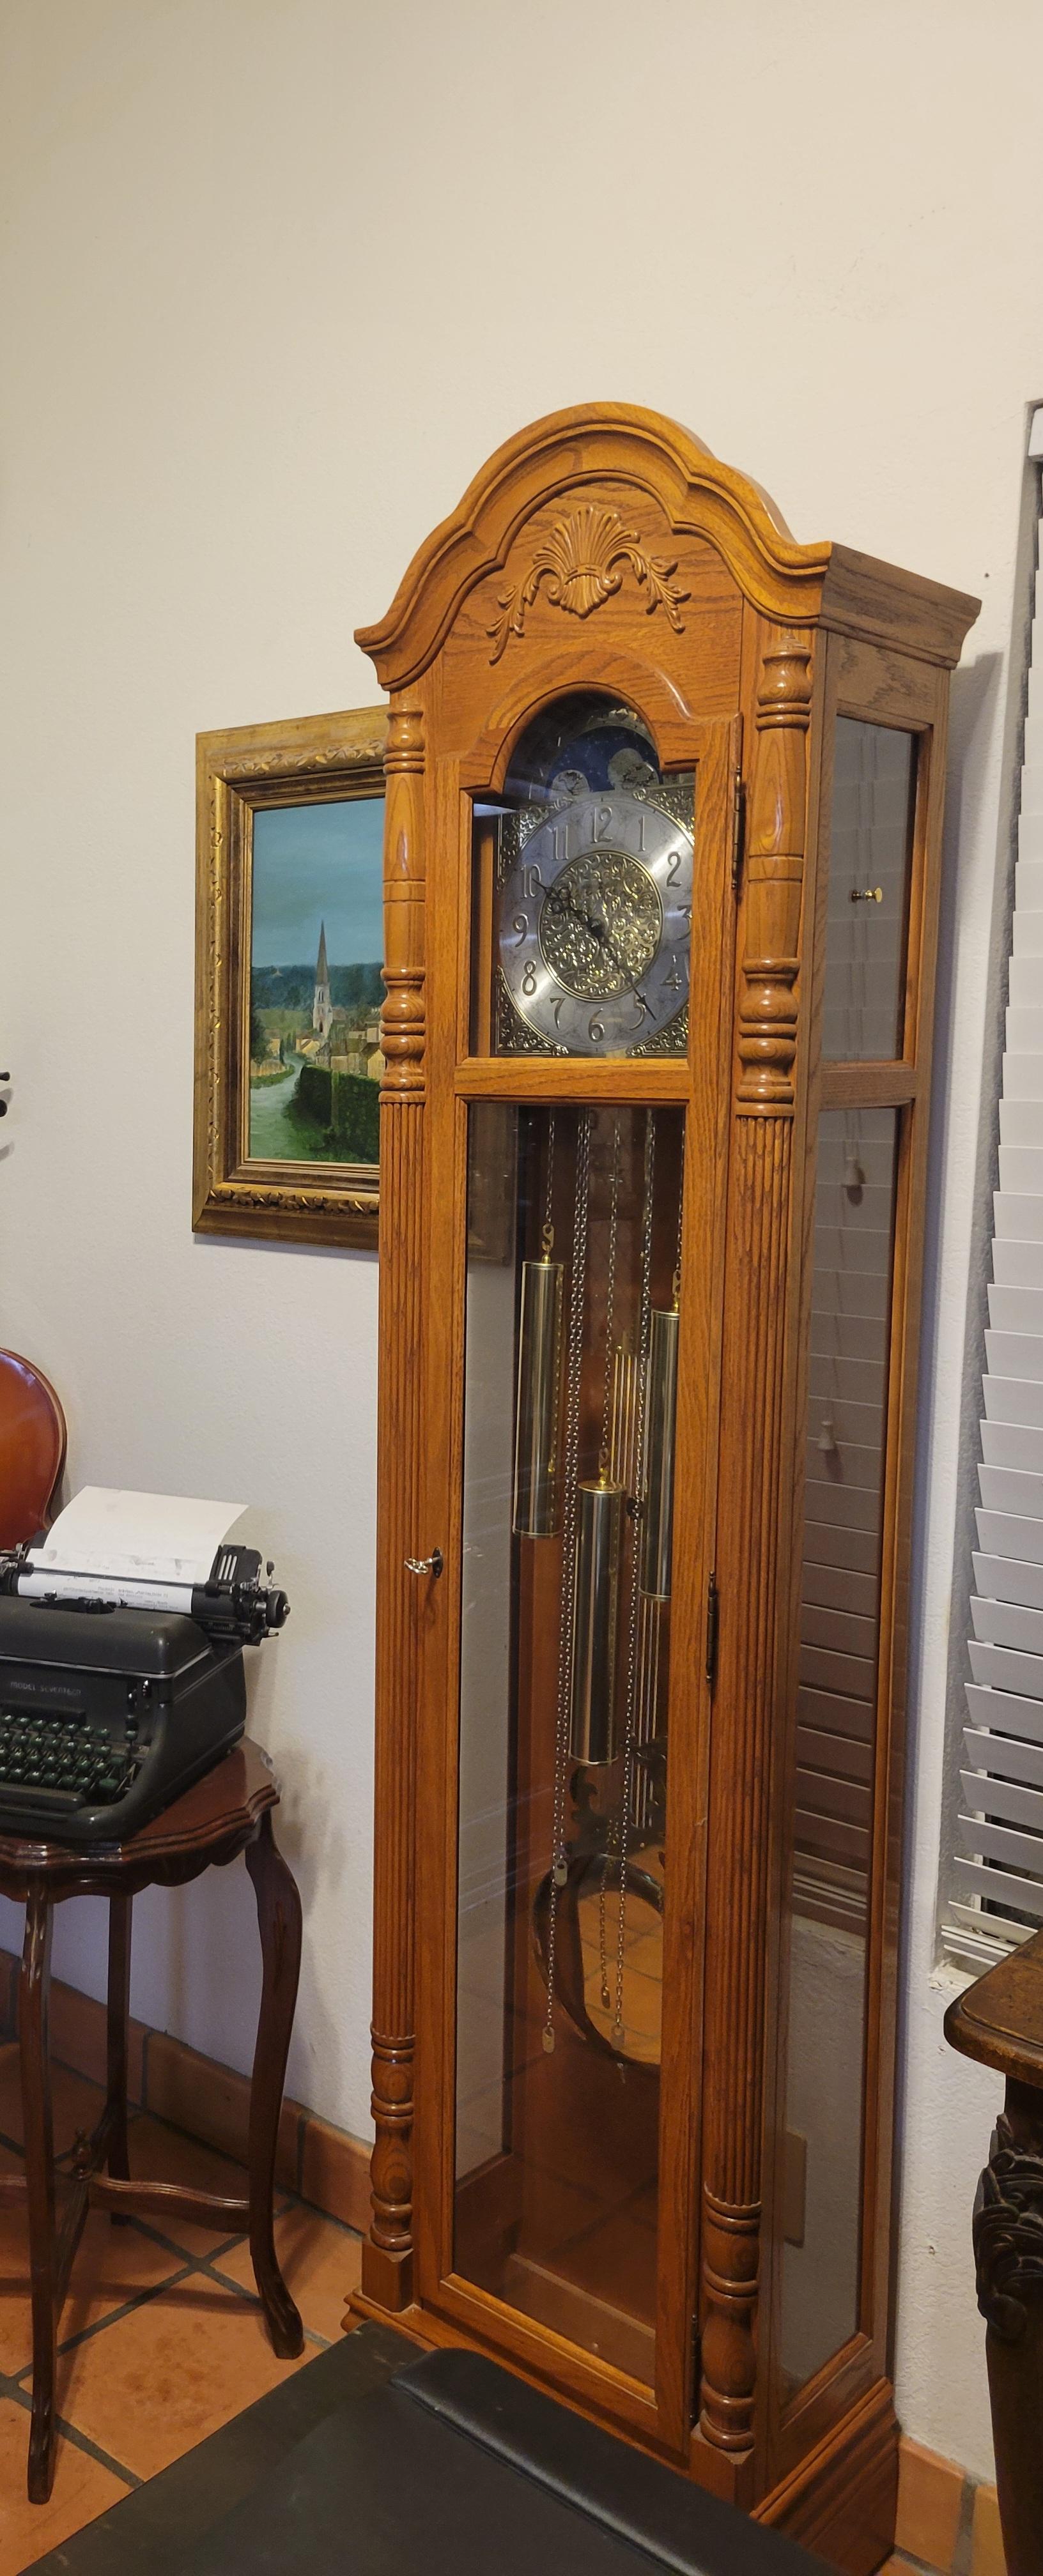 second-hand grandfather clocks for sale